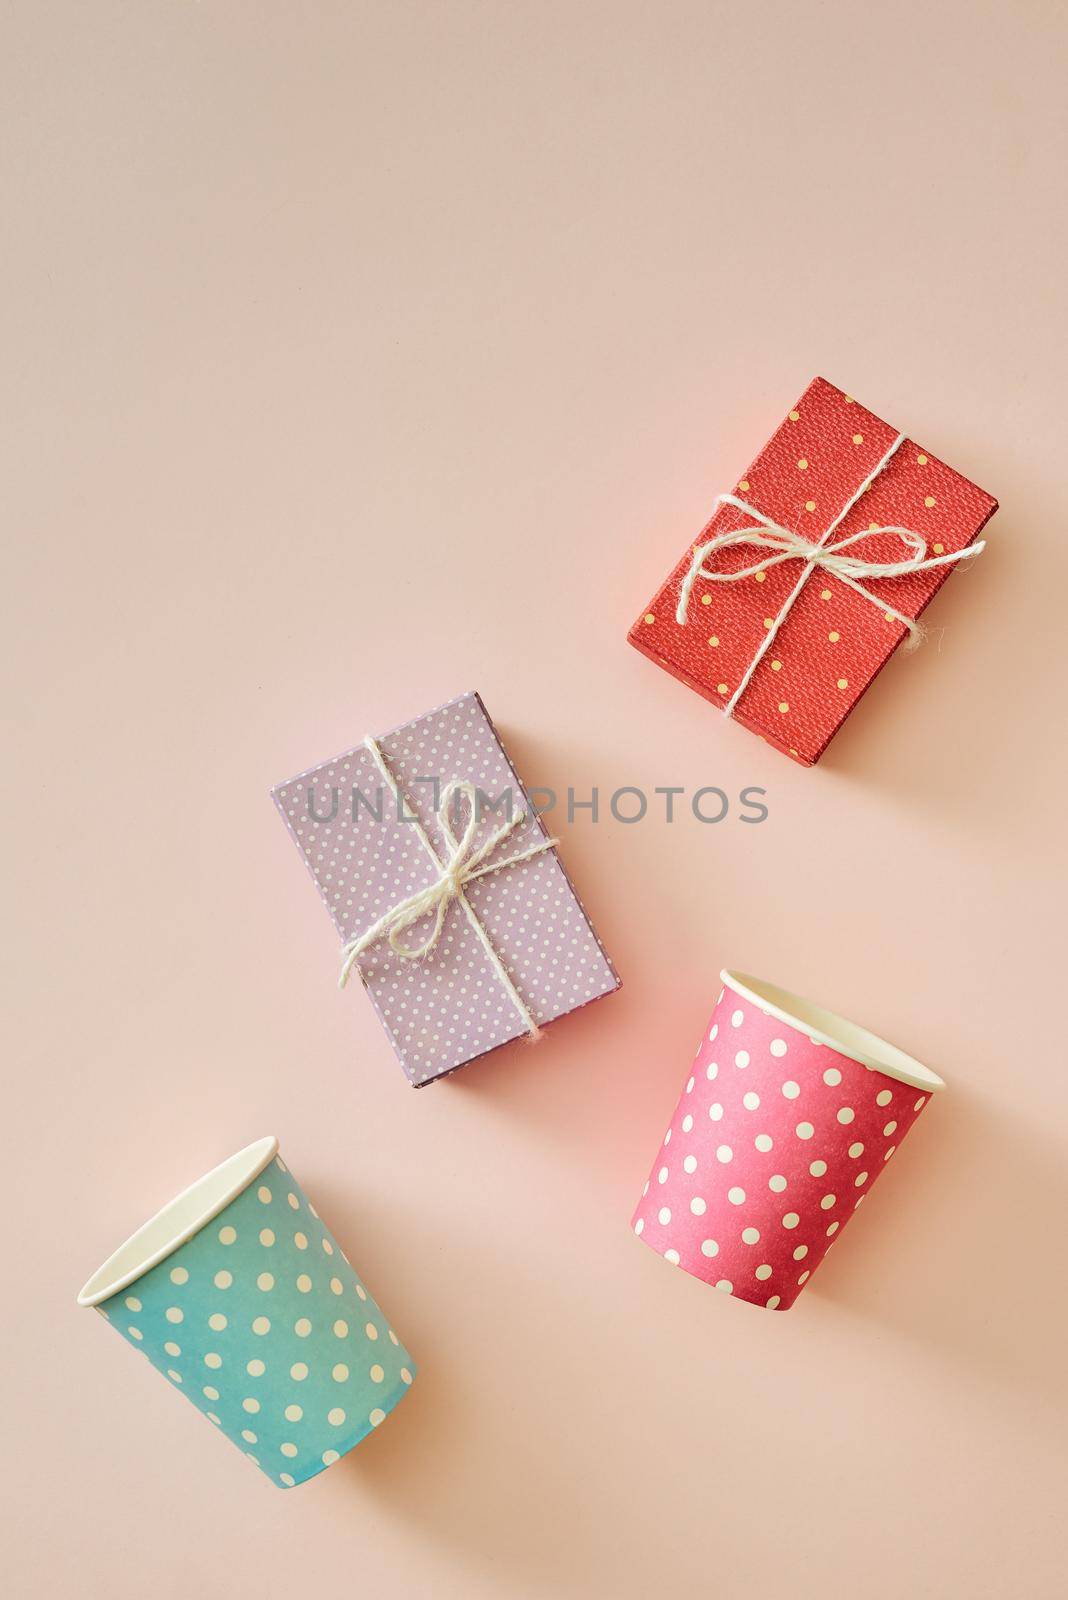 Cups and gift boxes wrapped in polka dots colorful paper